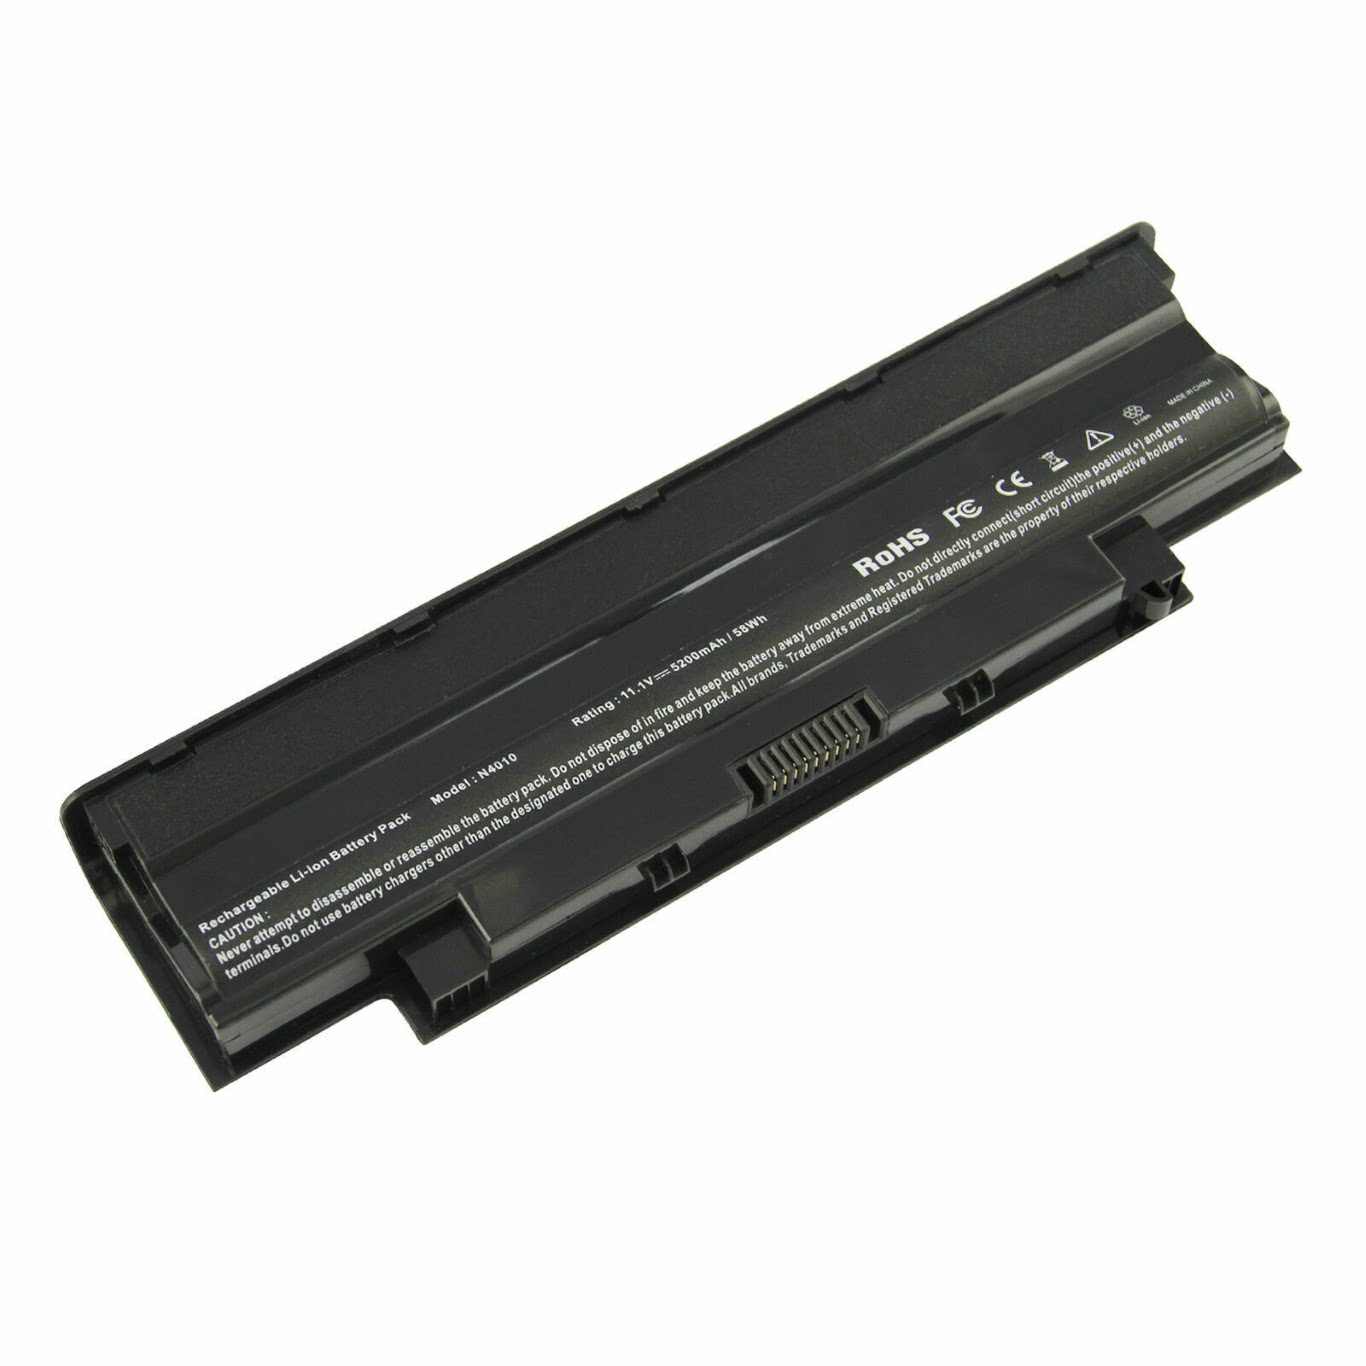 04YRJH, 312-0233 replacement Laptop Battery for Dell Inspiron 13R, Inspiron 13R (3010-D330), 11.1 V, 6 cells, 5200mAh